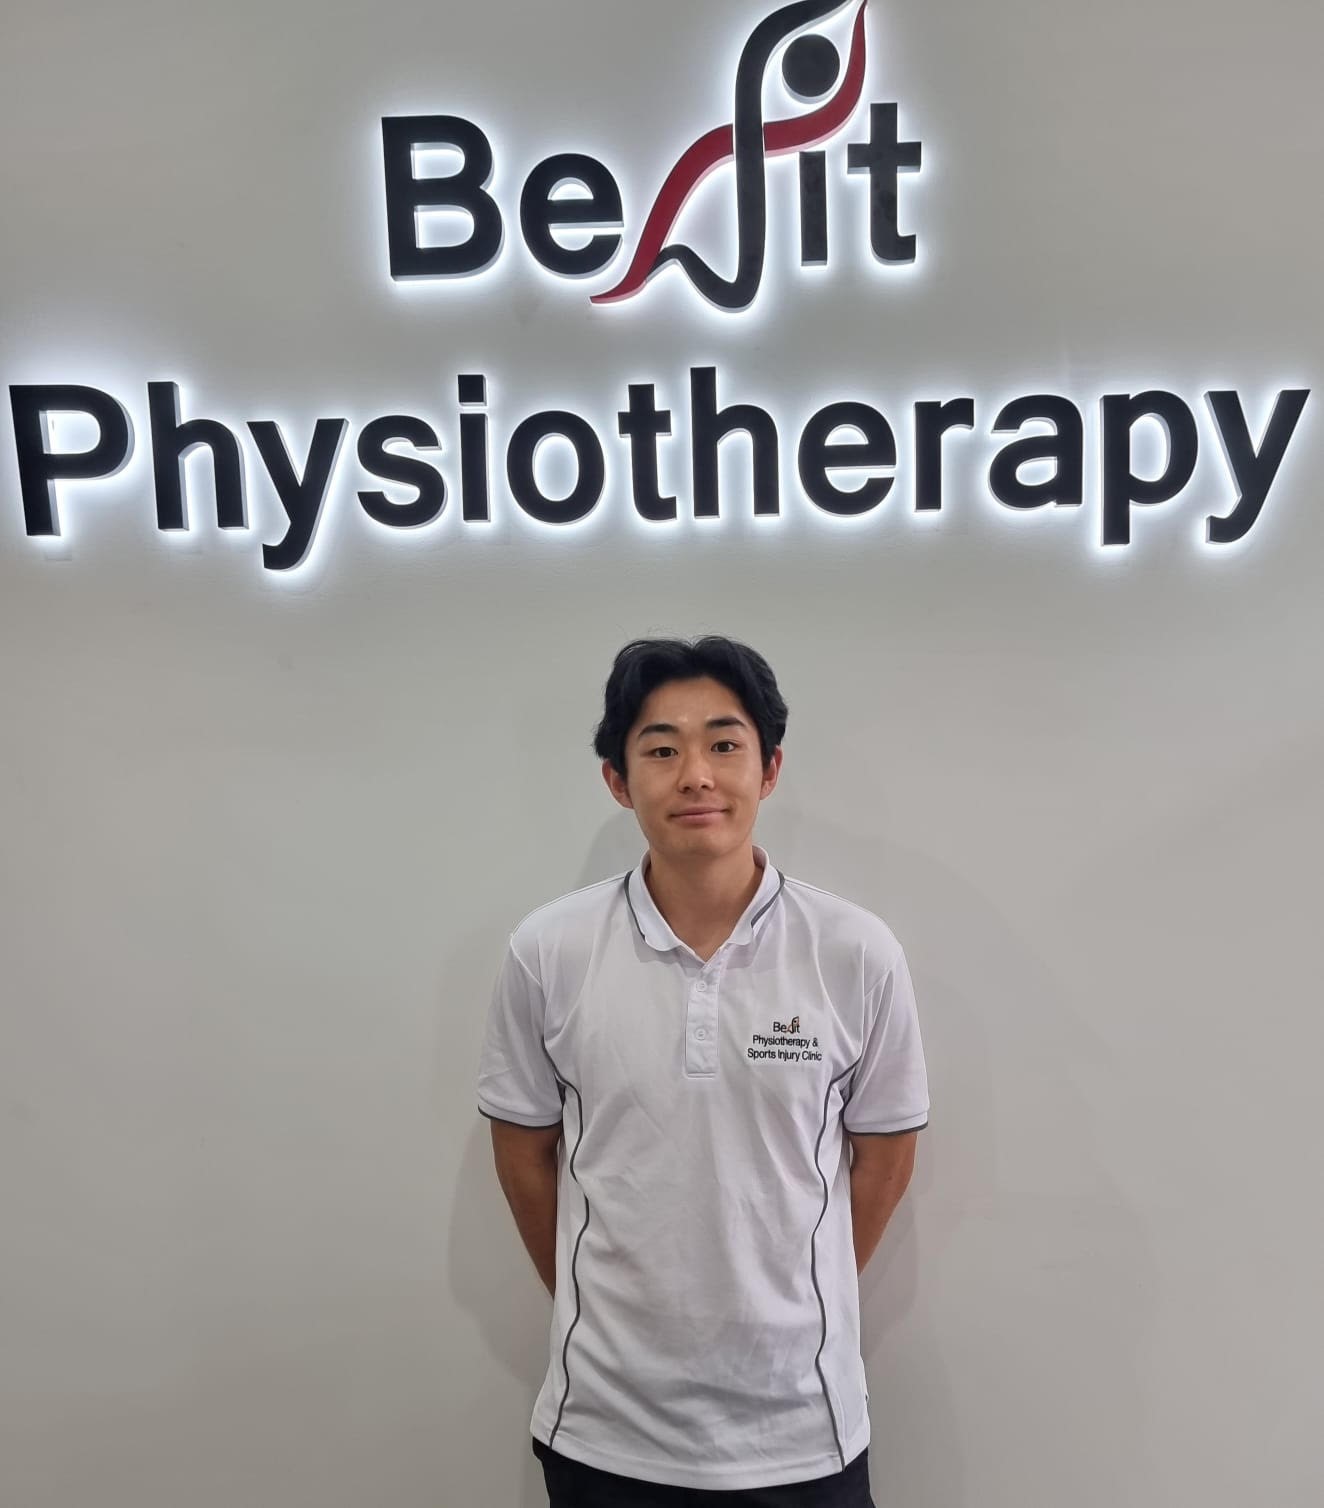 Befit Physiotherapy